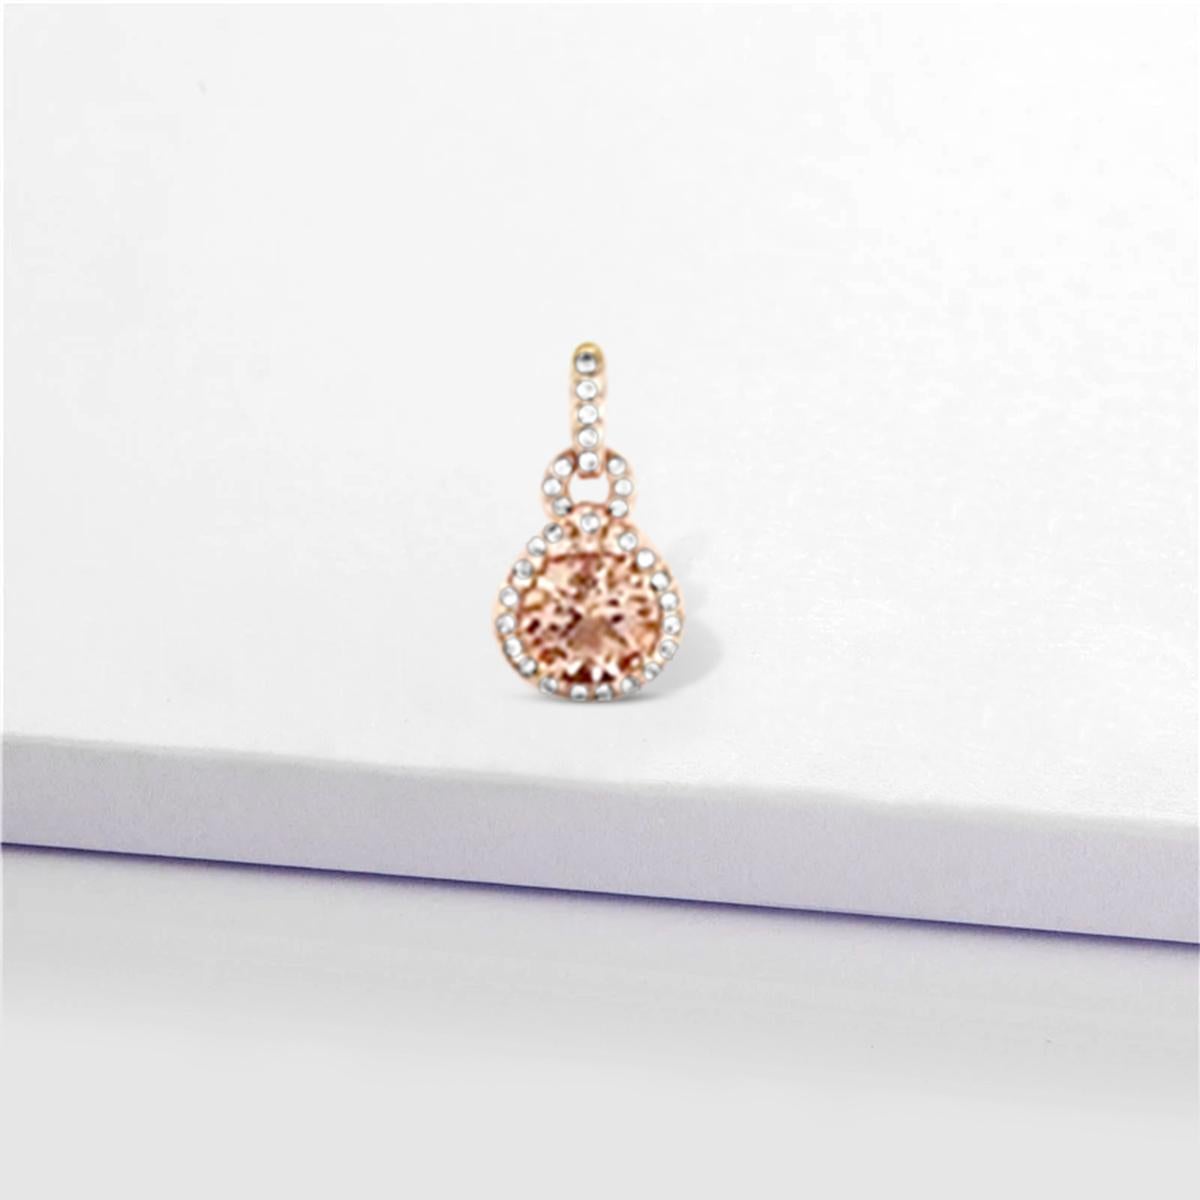 Fine Quality 14K Rose Gold Pendant Features 7mm Round Cut Morganite Stone Sits Nestled Among A Halo Of Diamonds Leaves A Lasting Impression. This Elegant Piece of Morganite Pendant is Best for your Fancy Events.

Style# TS1127MOP
Morganite: Round